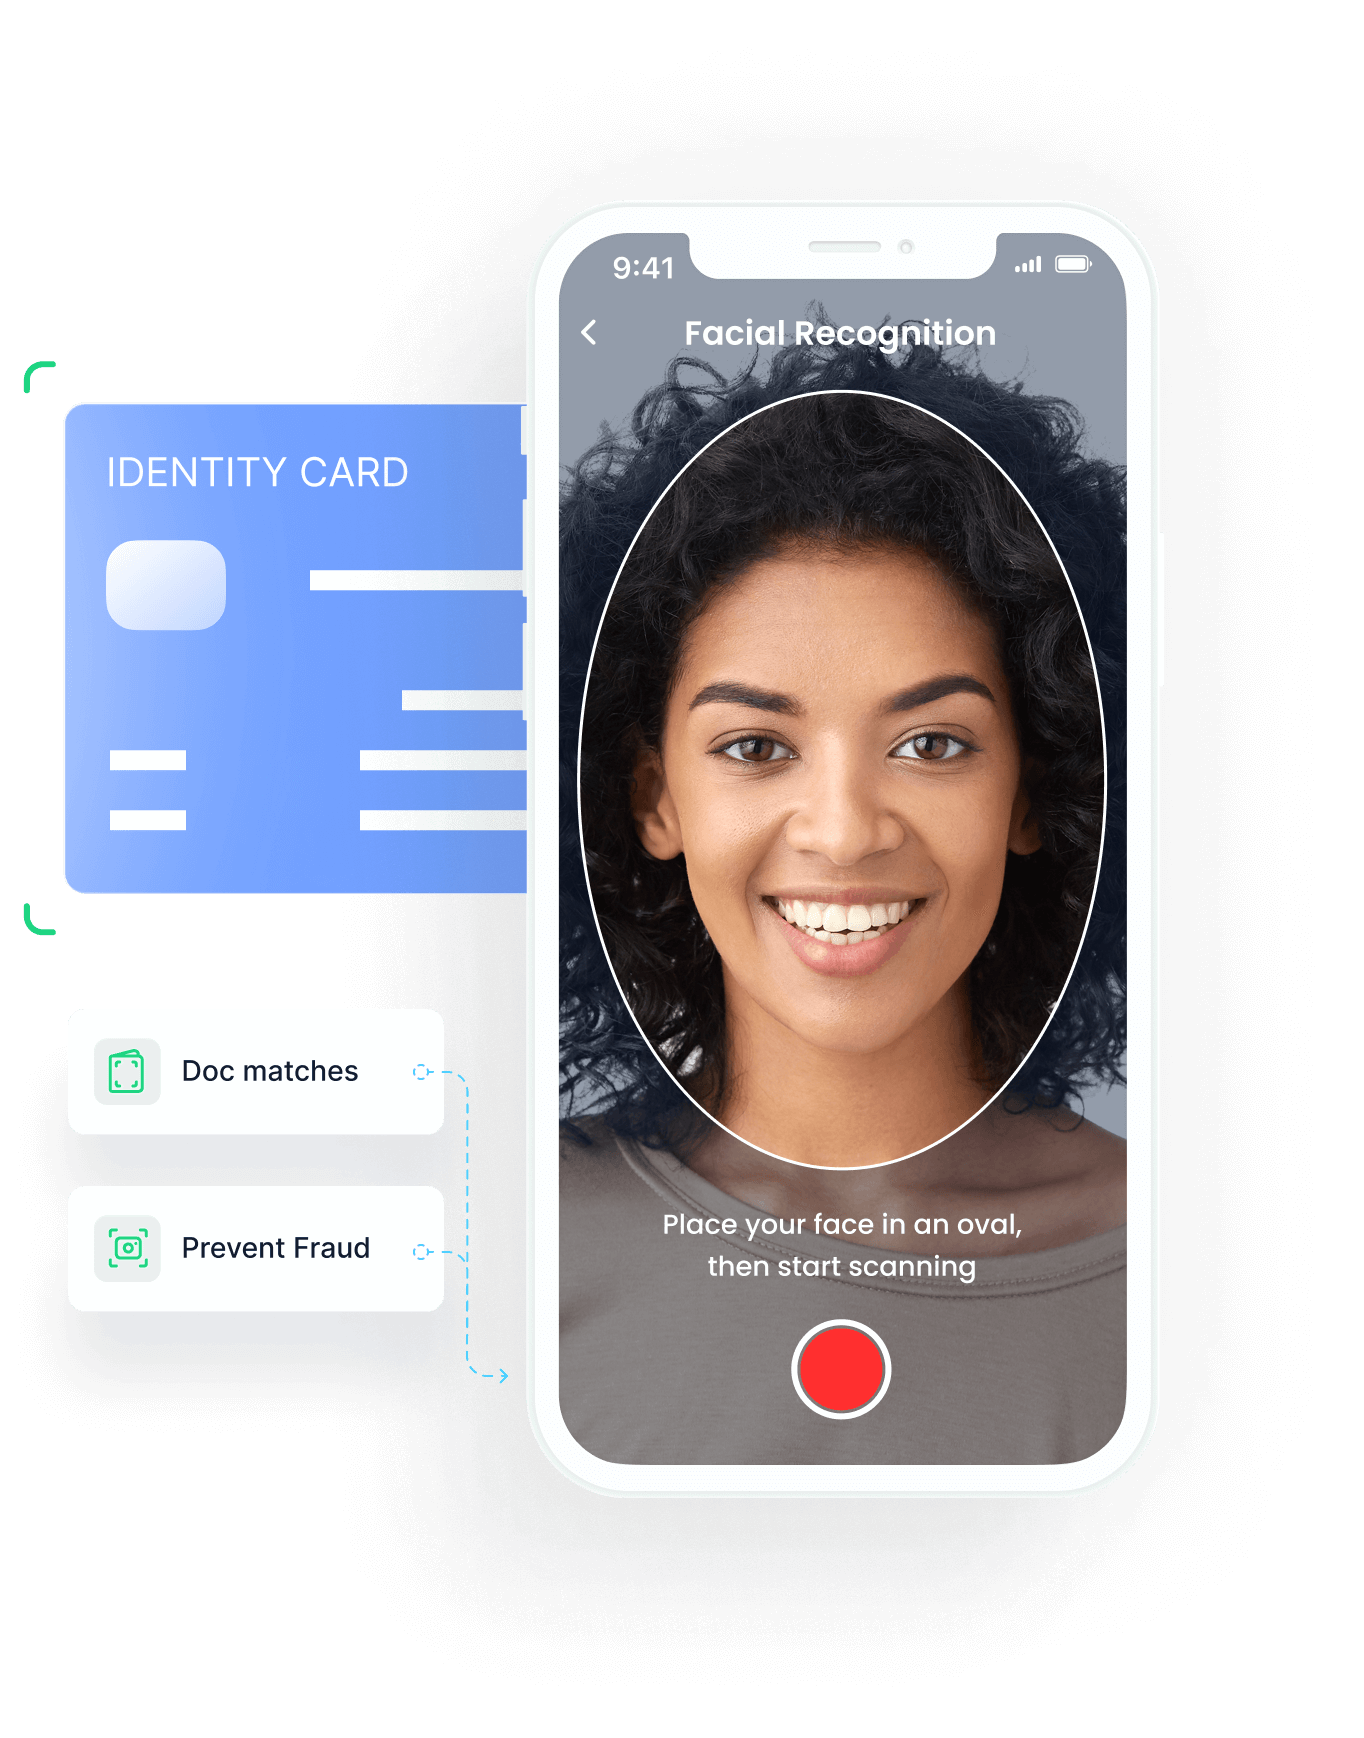 Protect against stolen identities and impersonation while delivering a superior user experience with liveness-based biometric facial recognition.